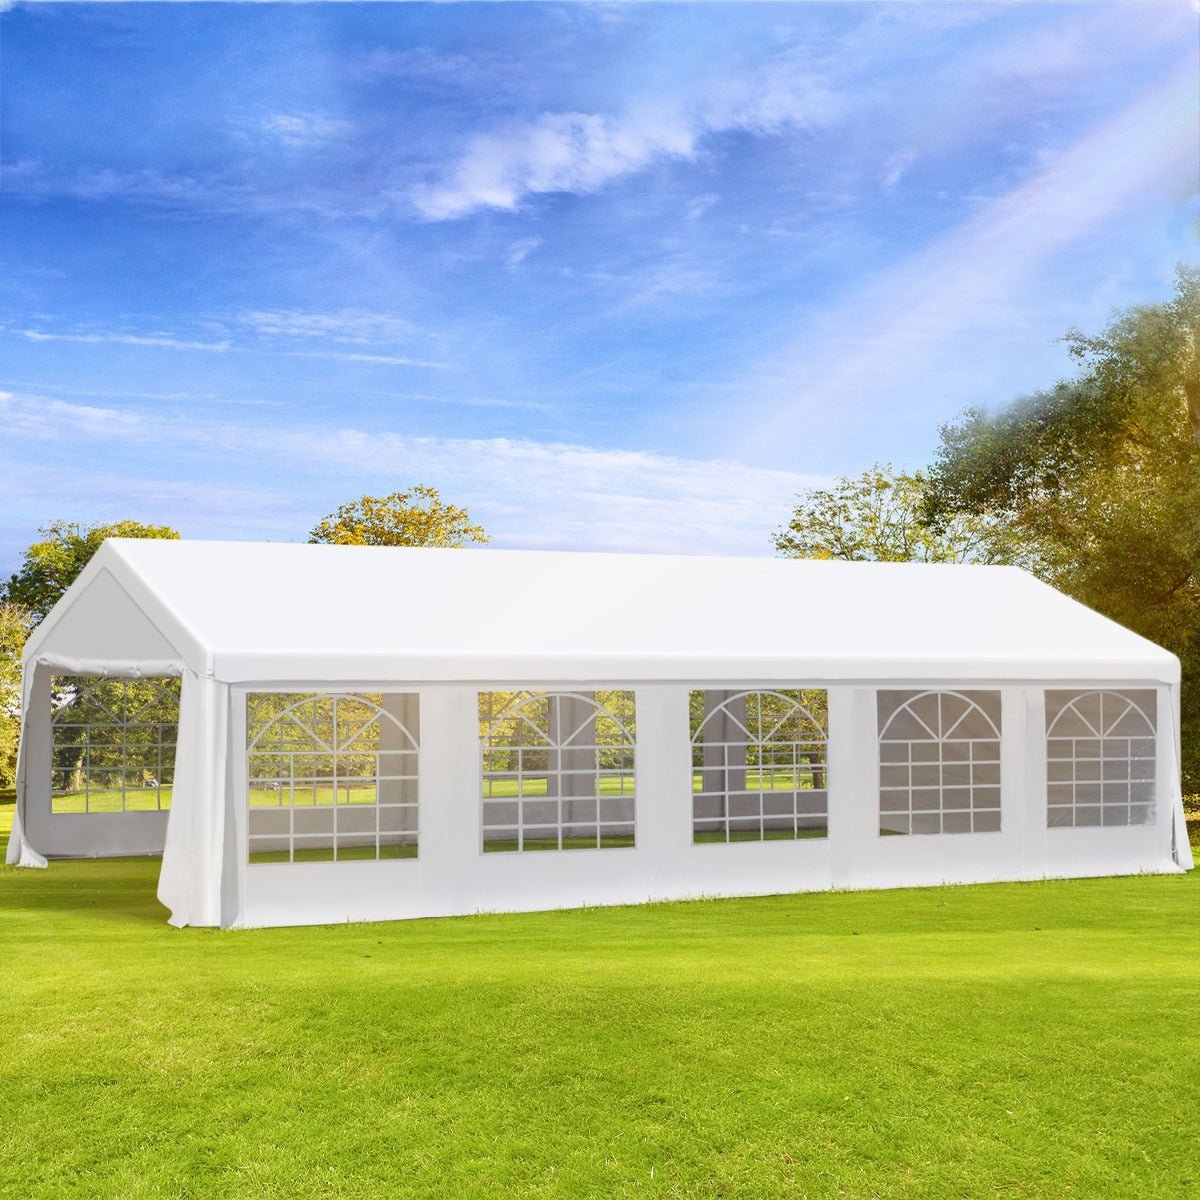 Outdoor and Garden-20' x 32' Outdoor Party Tent, Gazebo Canopy Party Wedding Tent with Removable Sidewalls & Zippered Doors, for Weddings or Event, White - Outdoor Style Company